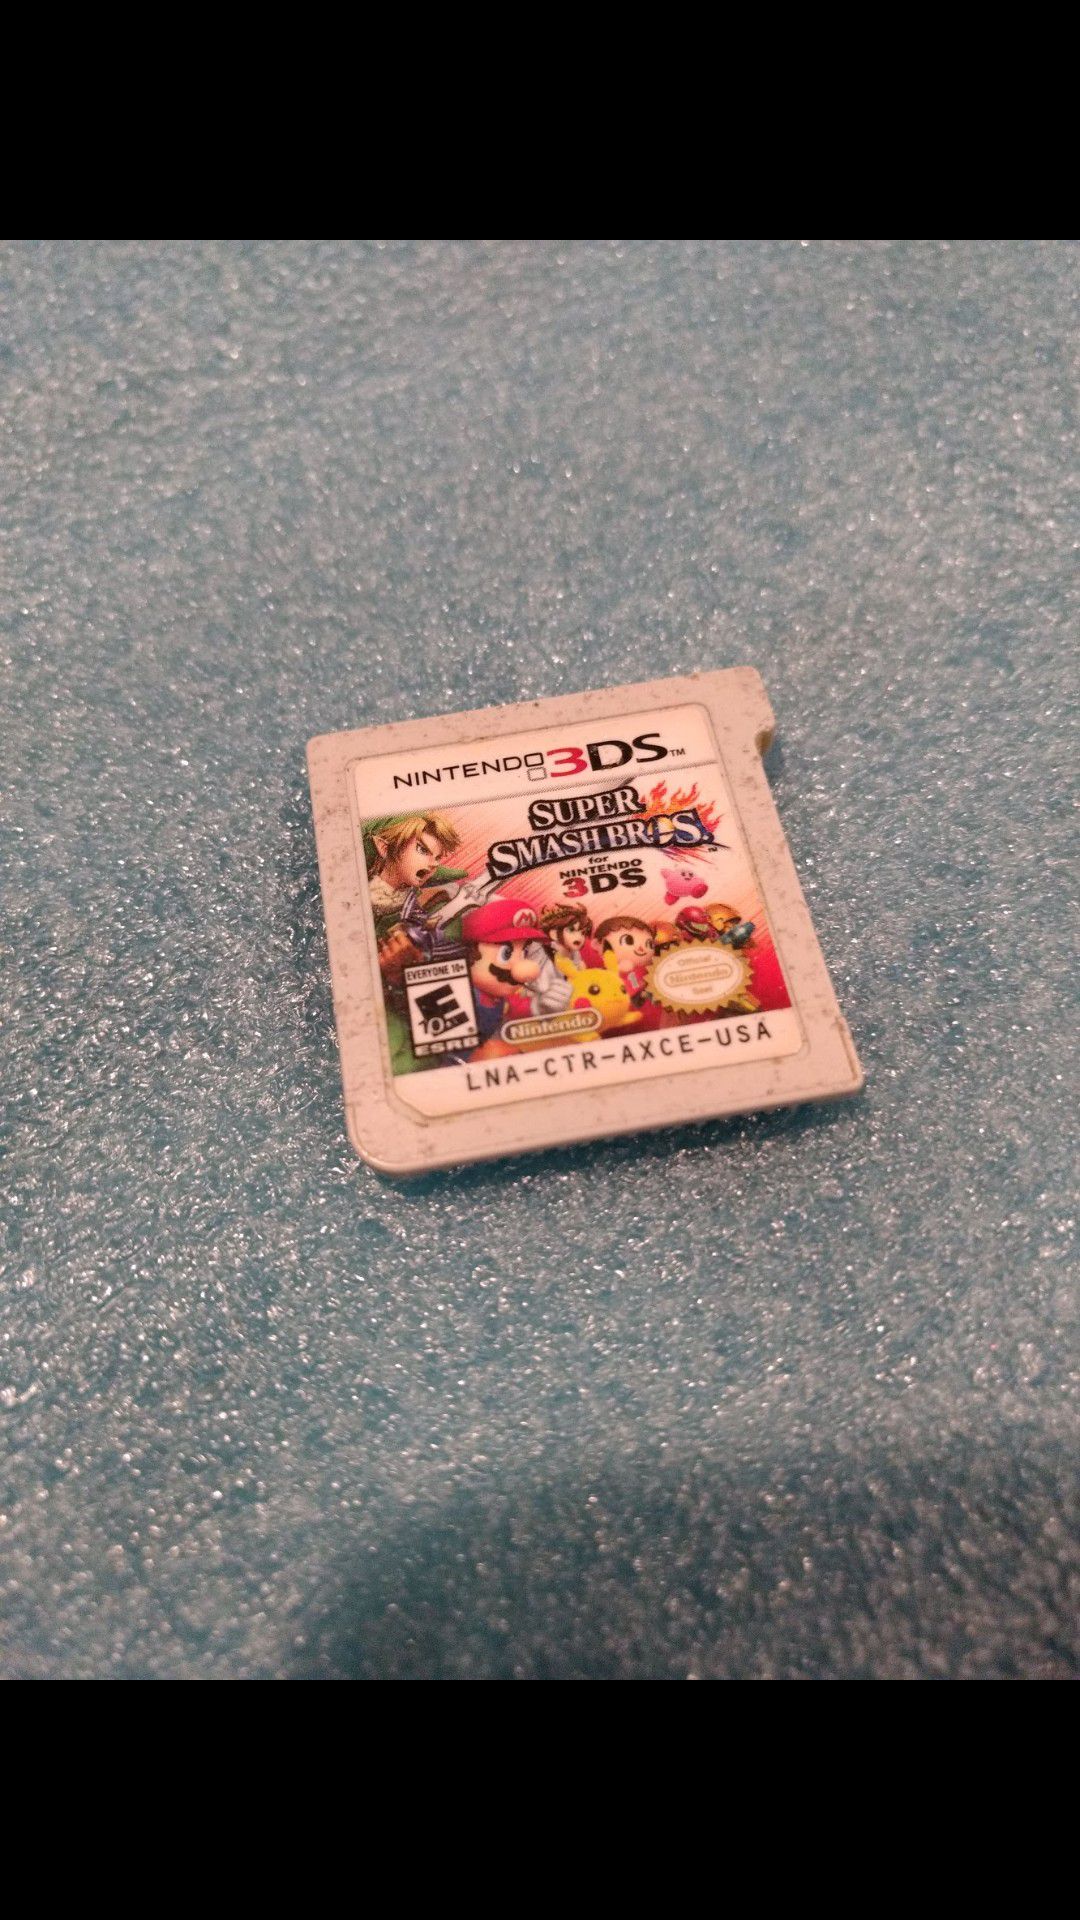 3DS game